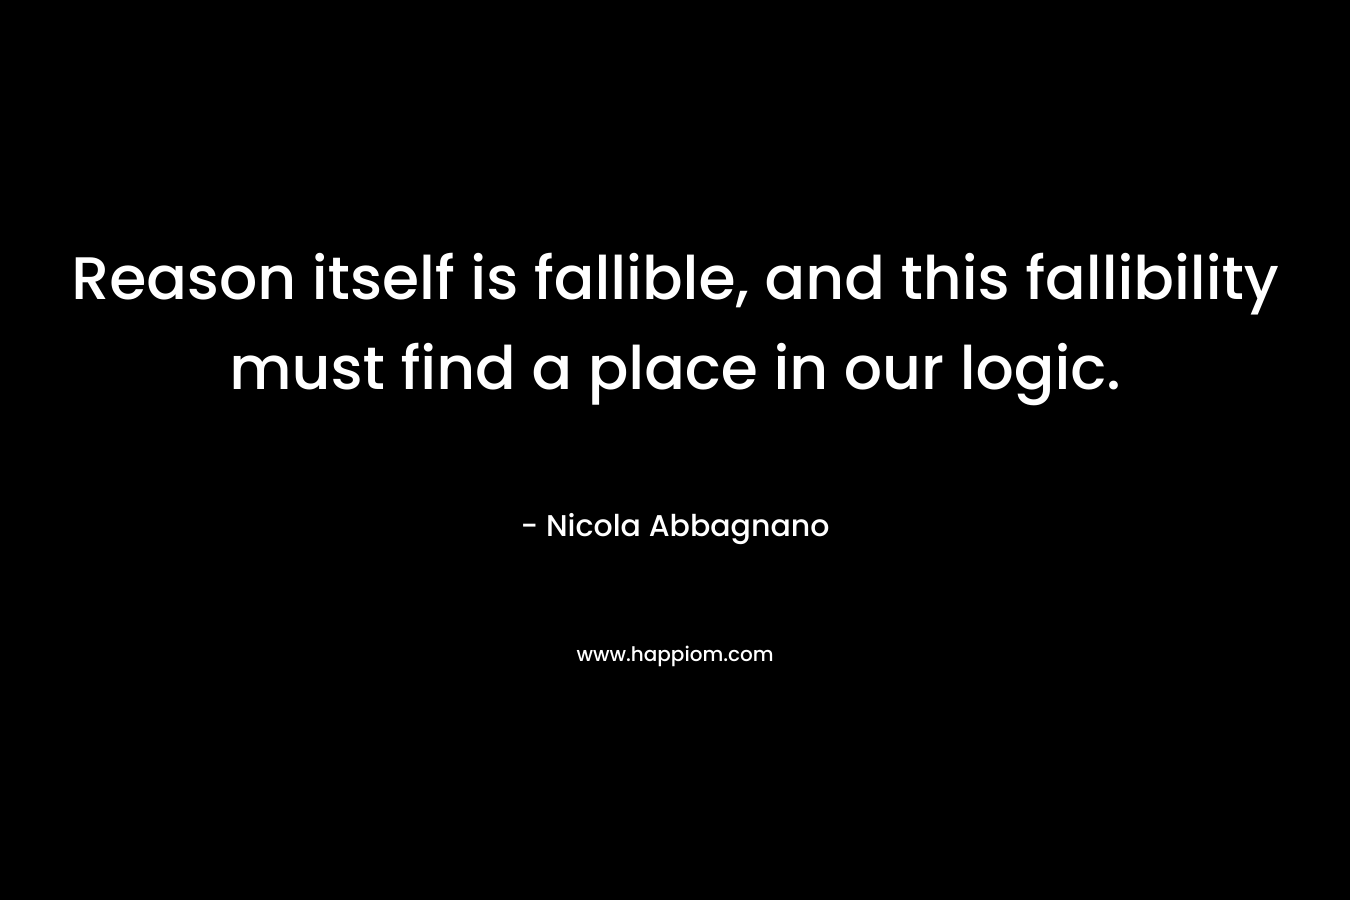 Reason itself is fallible, and this fallibility must find a place in our logic. – Nicola Abbagnano